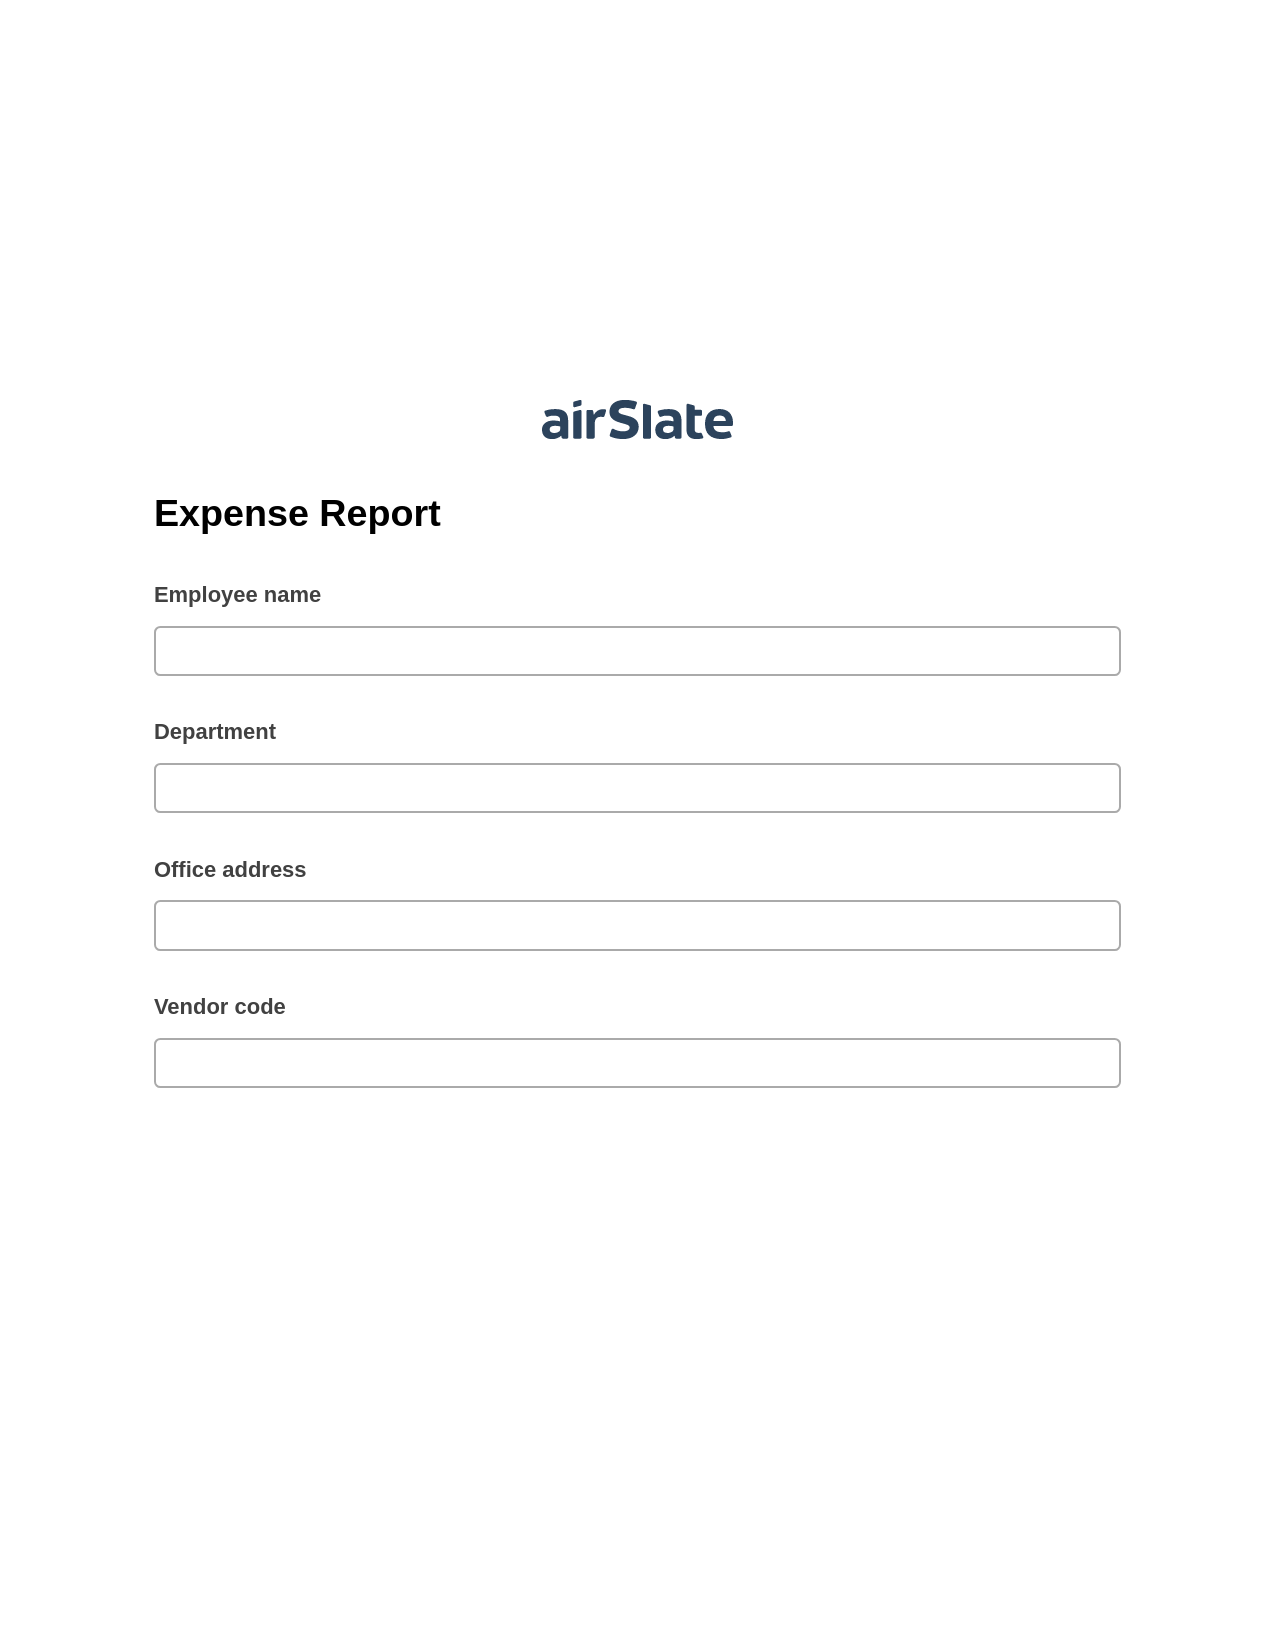 Expense Report Pre-fill from Salesforce Record Bot, Invoke Salesforce Process Bot, Export to Formstack Documents Bot